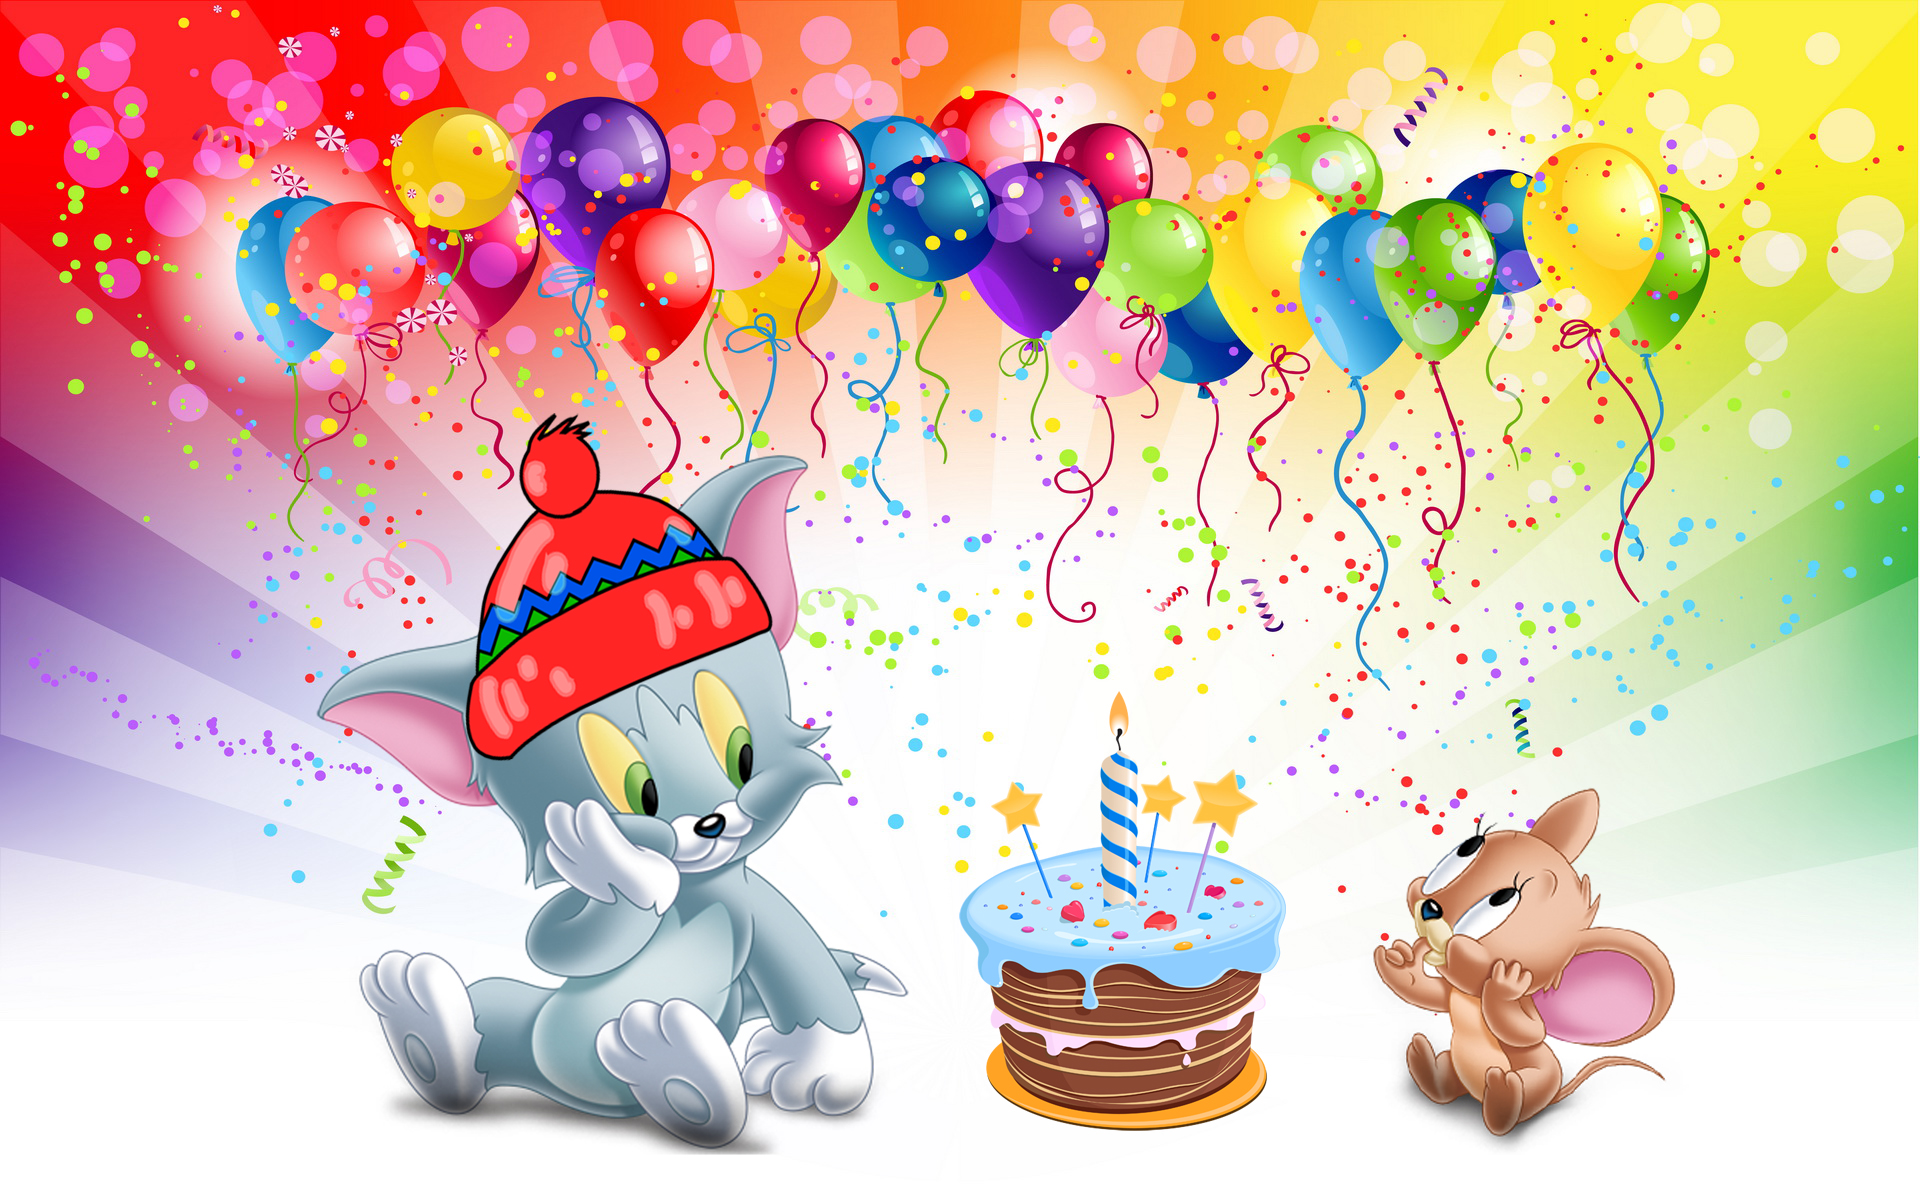 Tom-And-Jerry-first-birthday-cake-Desktop-HD-Wallpaper-for-Mobile-phones-Ta...